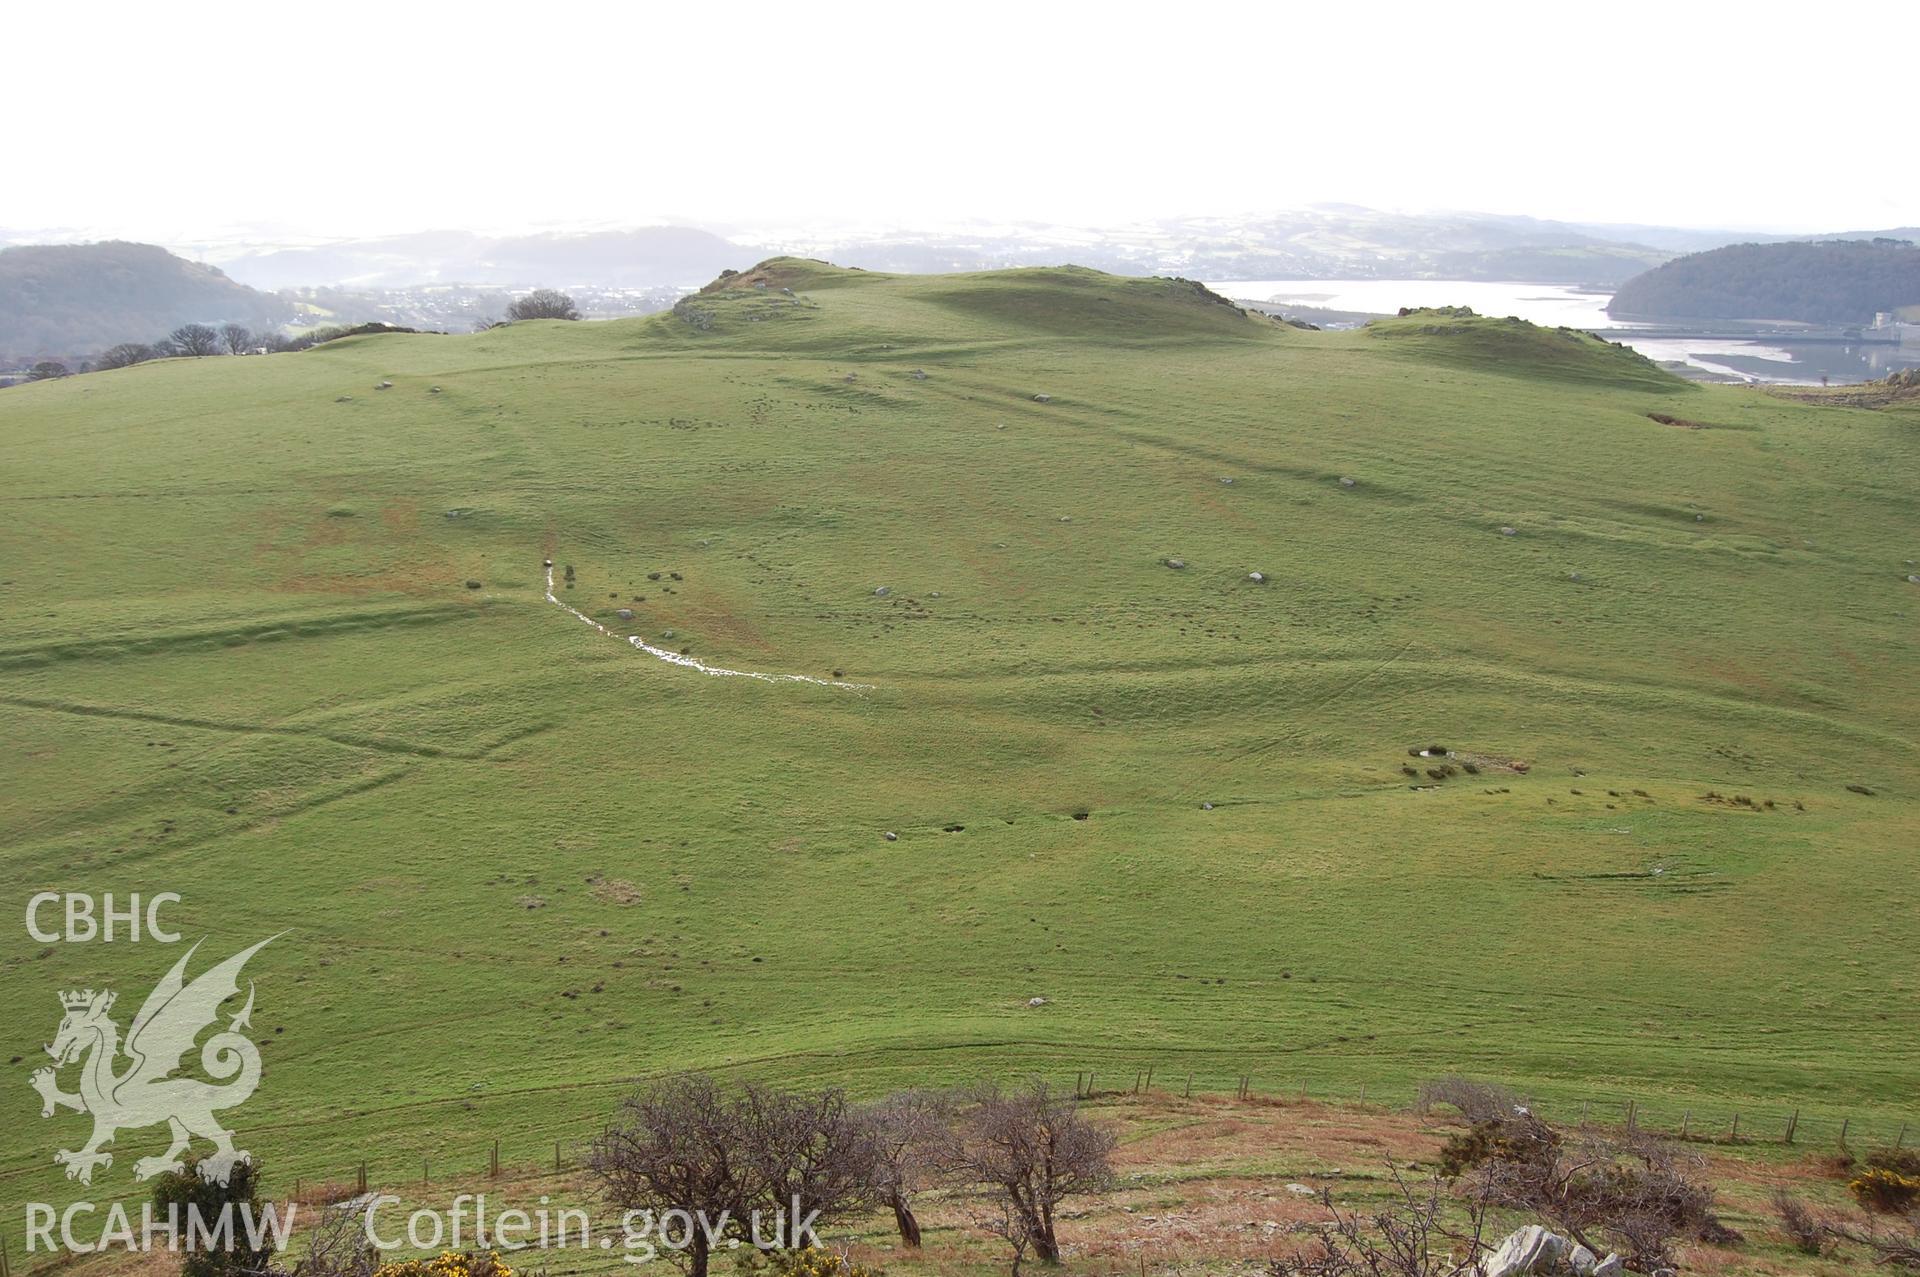 Digital photograph from an archaeological assessment of Deganwy Castle, carried out by Gwynedd Archaeological Trust, 2009. Field system south of the castle.